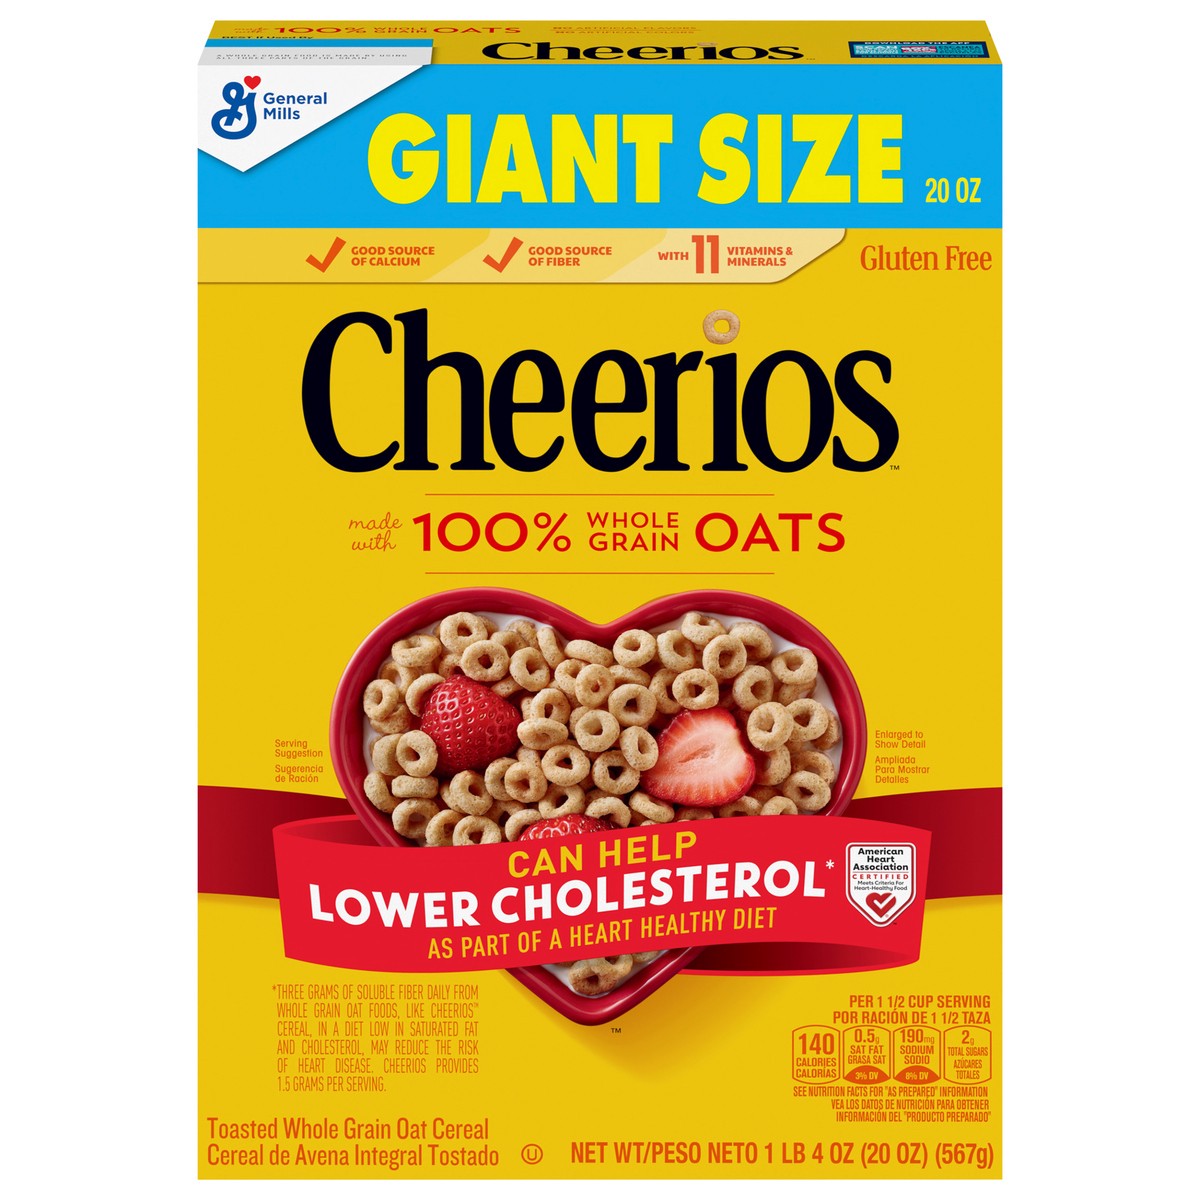 slide 1 of 4, Cheerios Cereal, Limited Edition Happy Heart Shapes, Heart Healthy Cereal With Whole Grain Oats, Giant Size, 20 oz, 20 oz